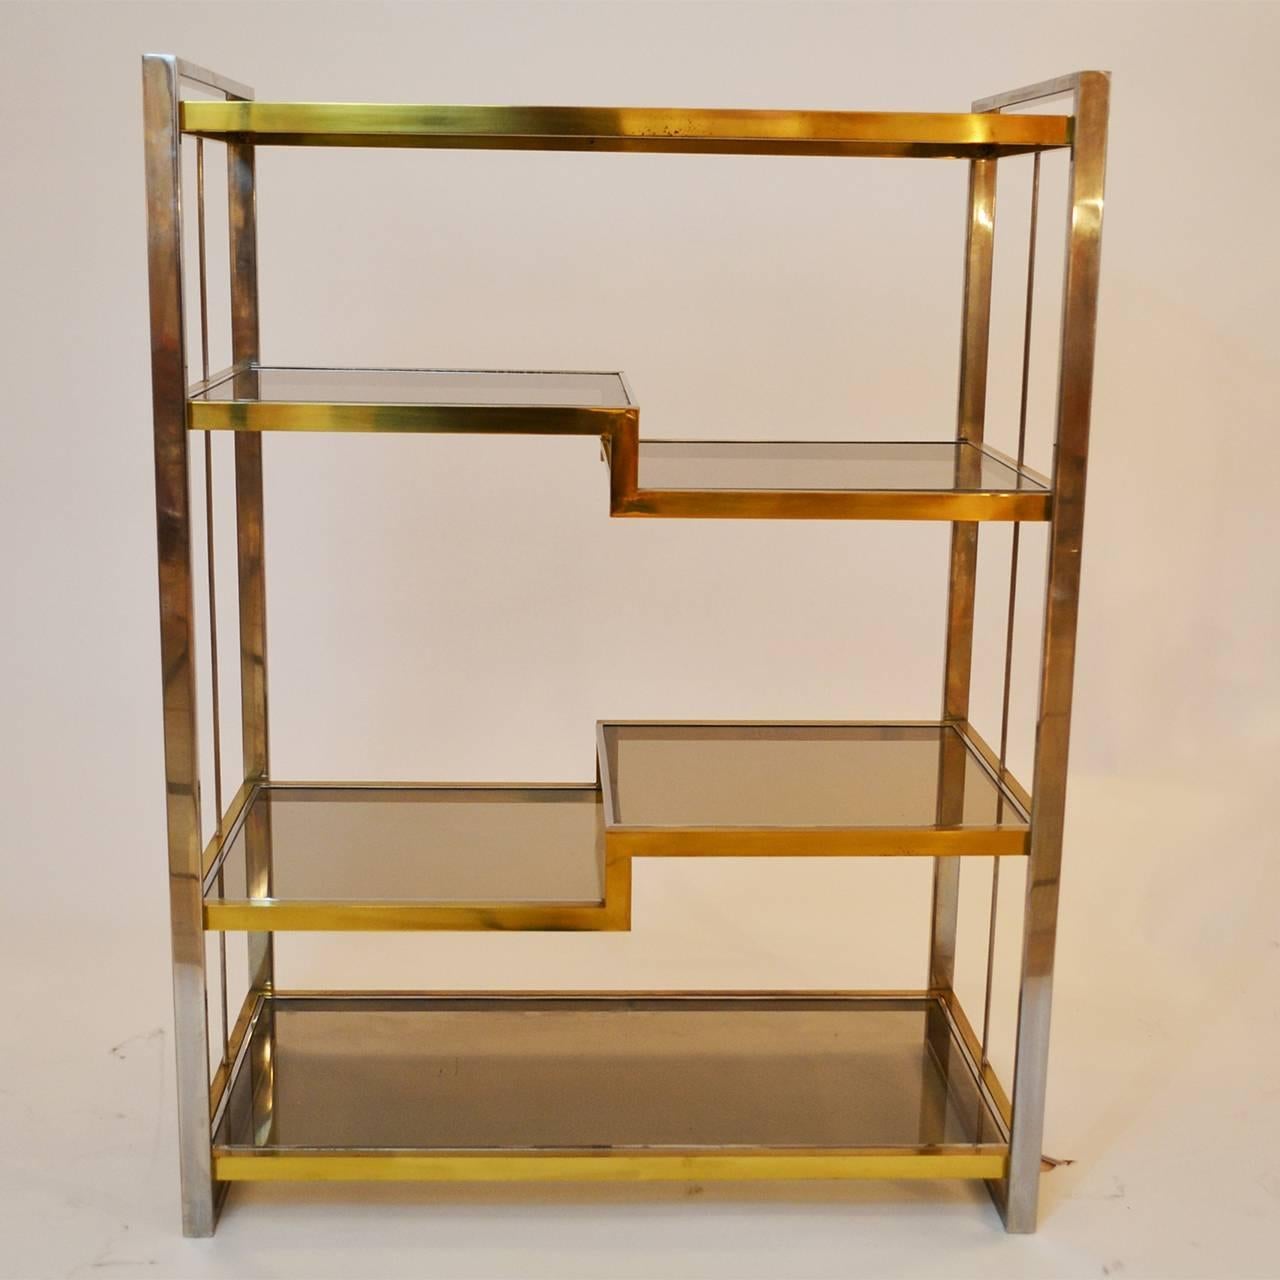 Steel and brass bookshelf with smoked glass shelves, Italy, 1970s.